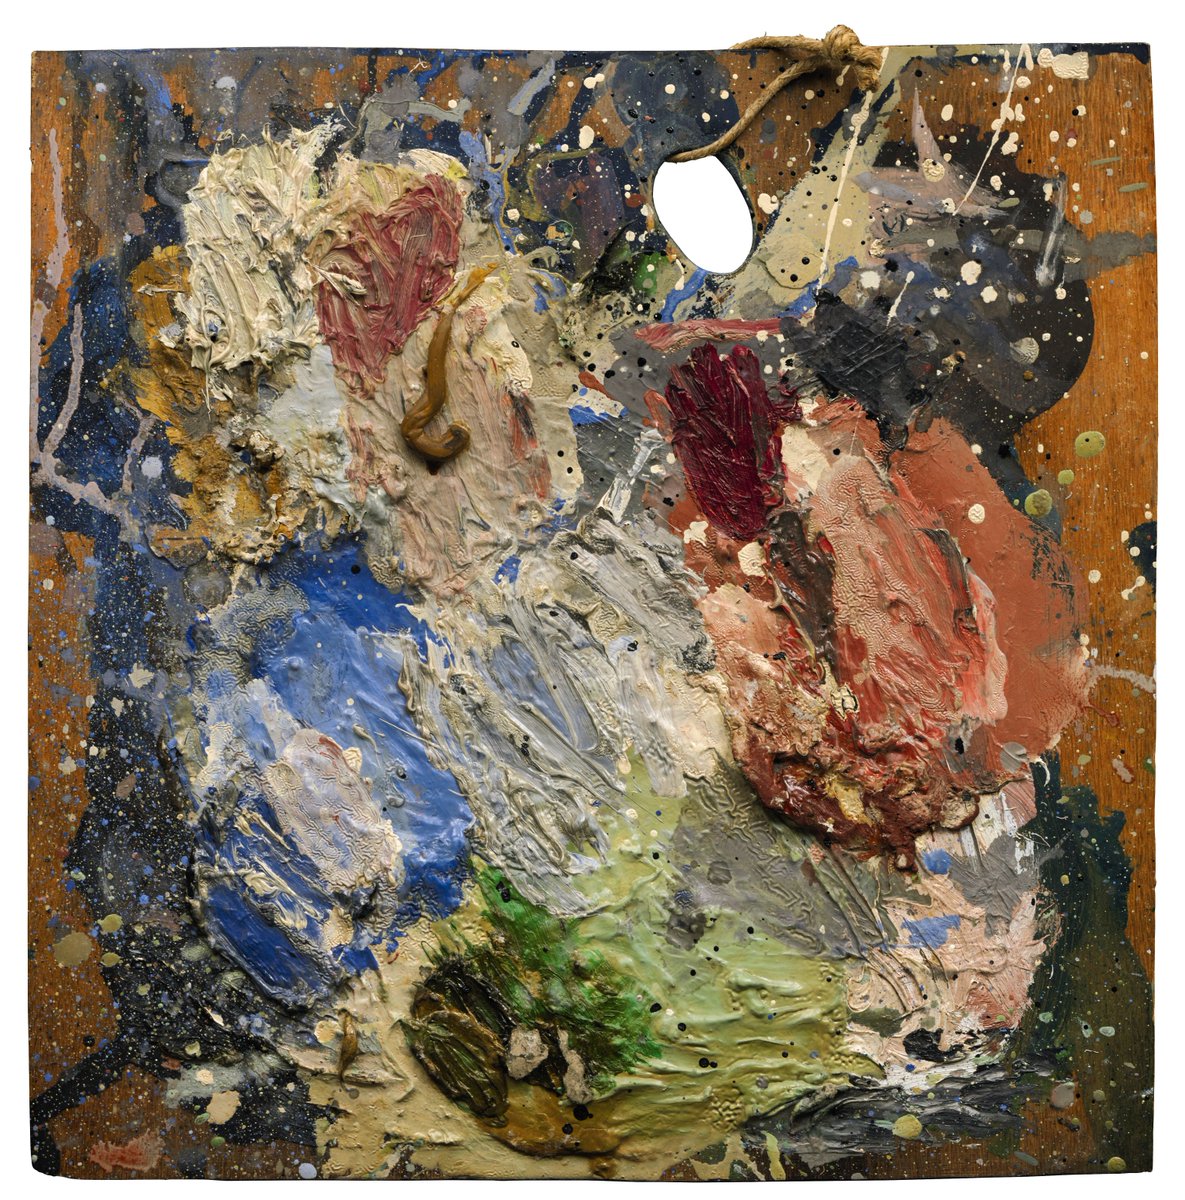 Sotheby's on X: "#AuctionUpdate Pablo #Picasso's paint-splattered palette  from his studio sells for £45,000 (£6-8K) https://t.co/b1lMBrOZsF" / X